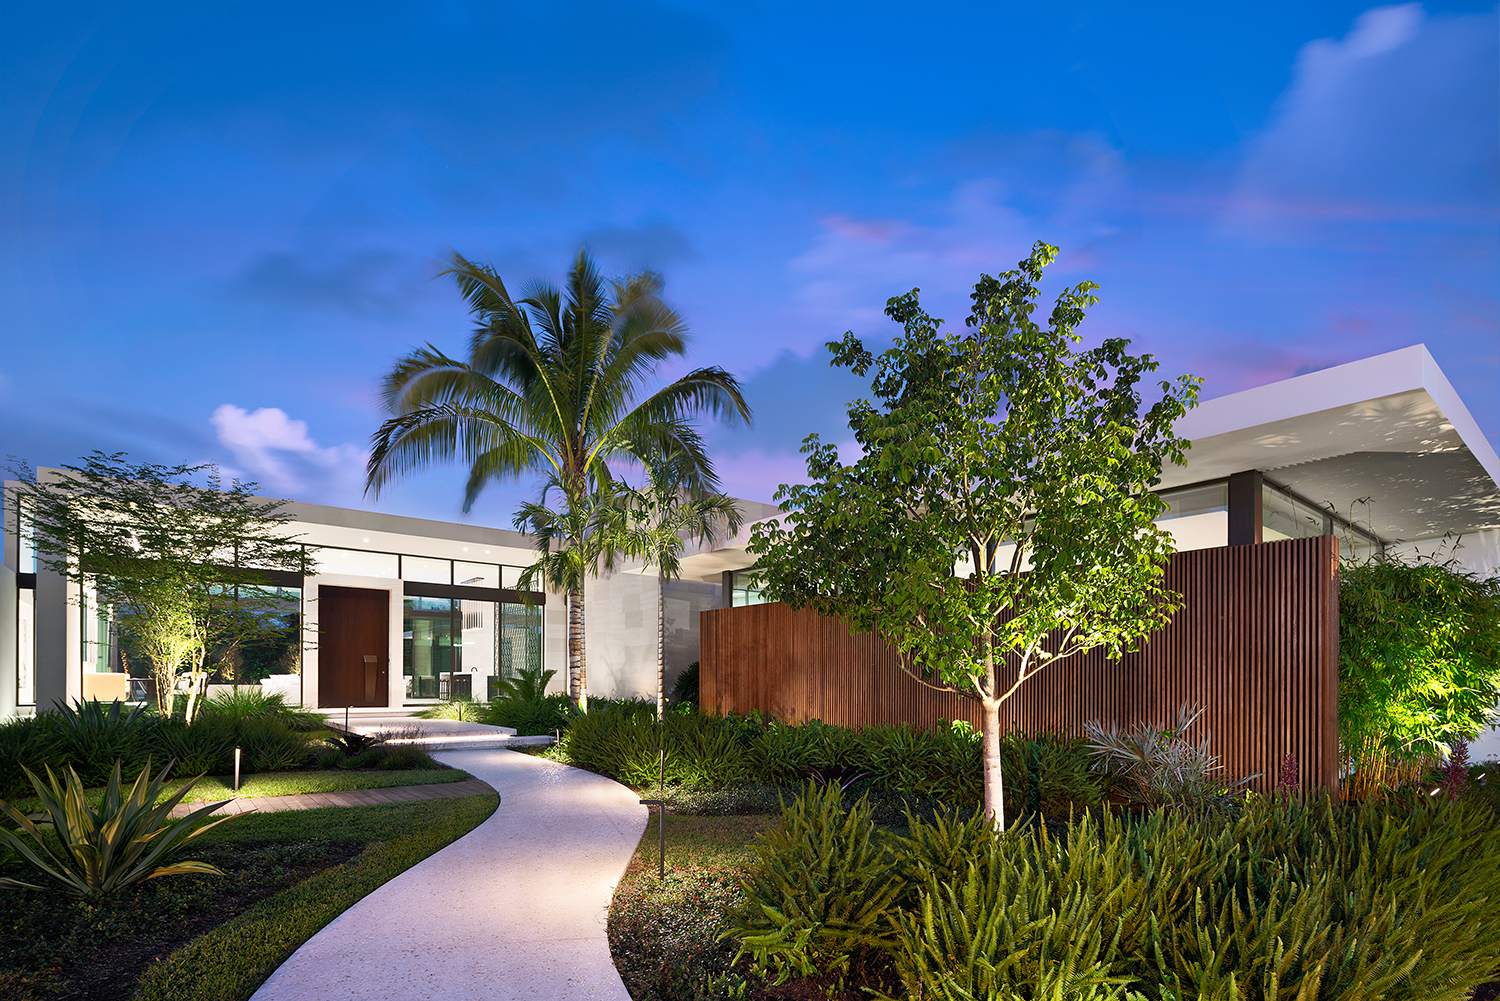 Rich landscaping adds to the overall splendor of the one-story Weston estate.